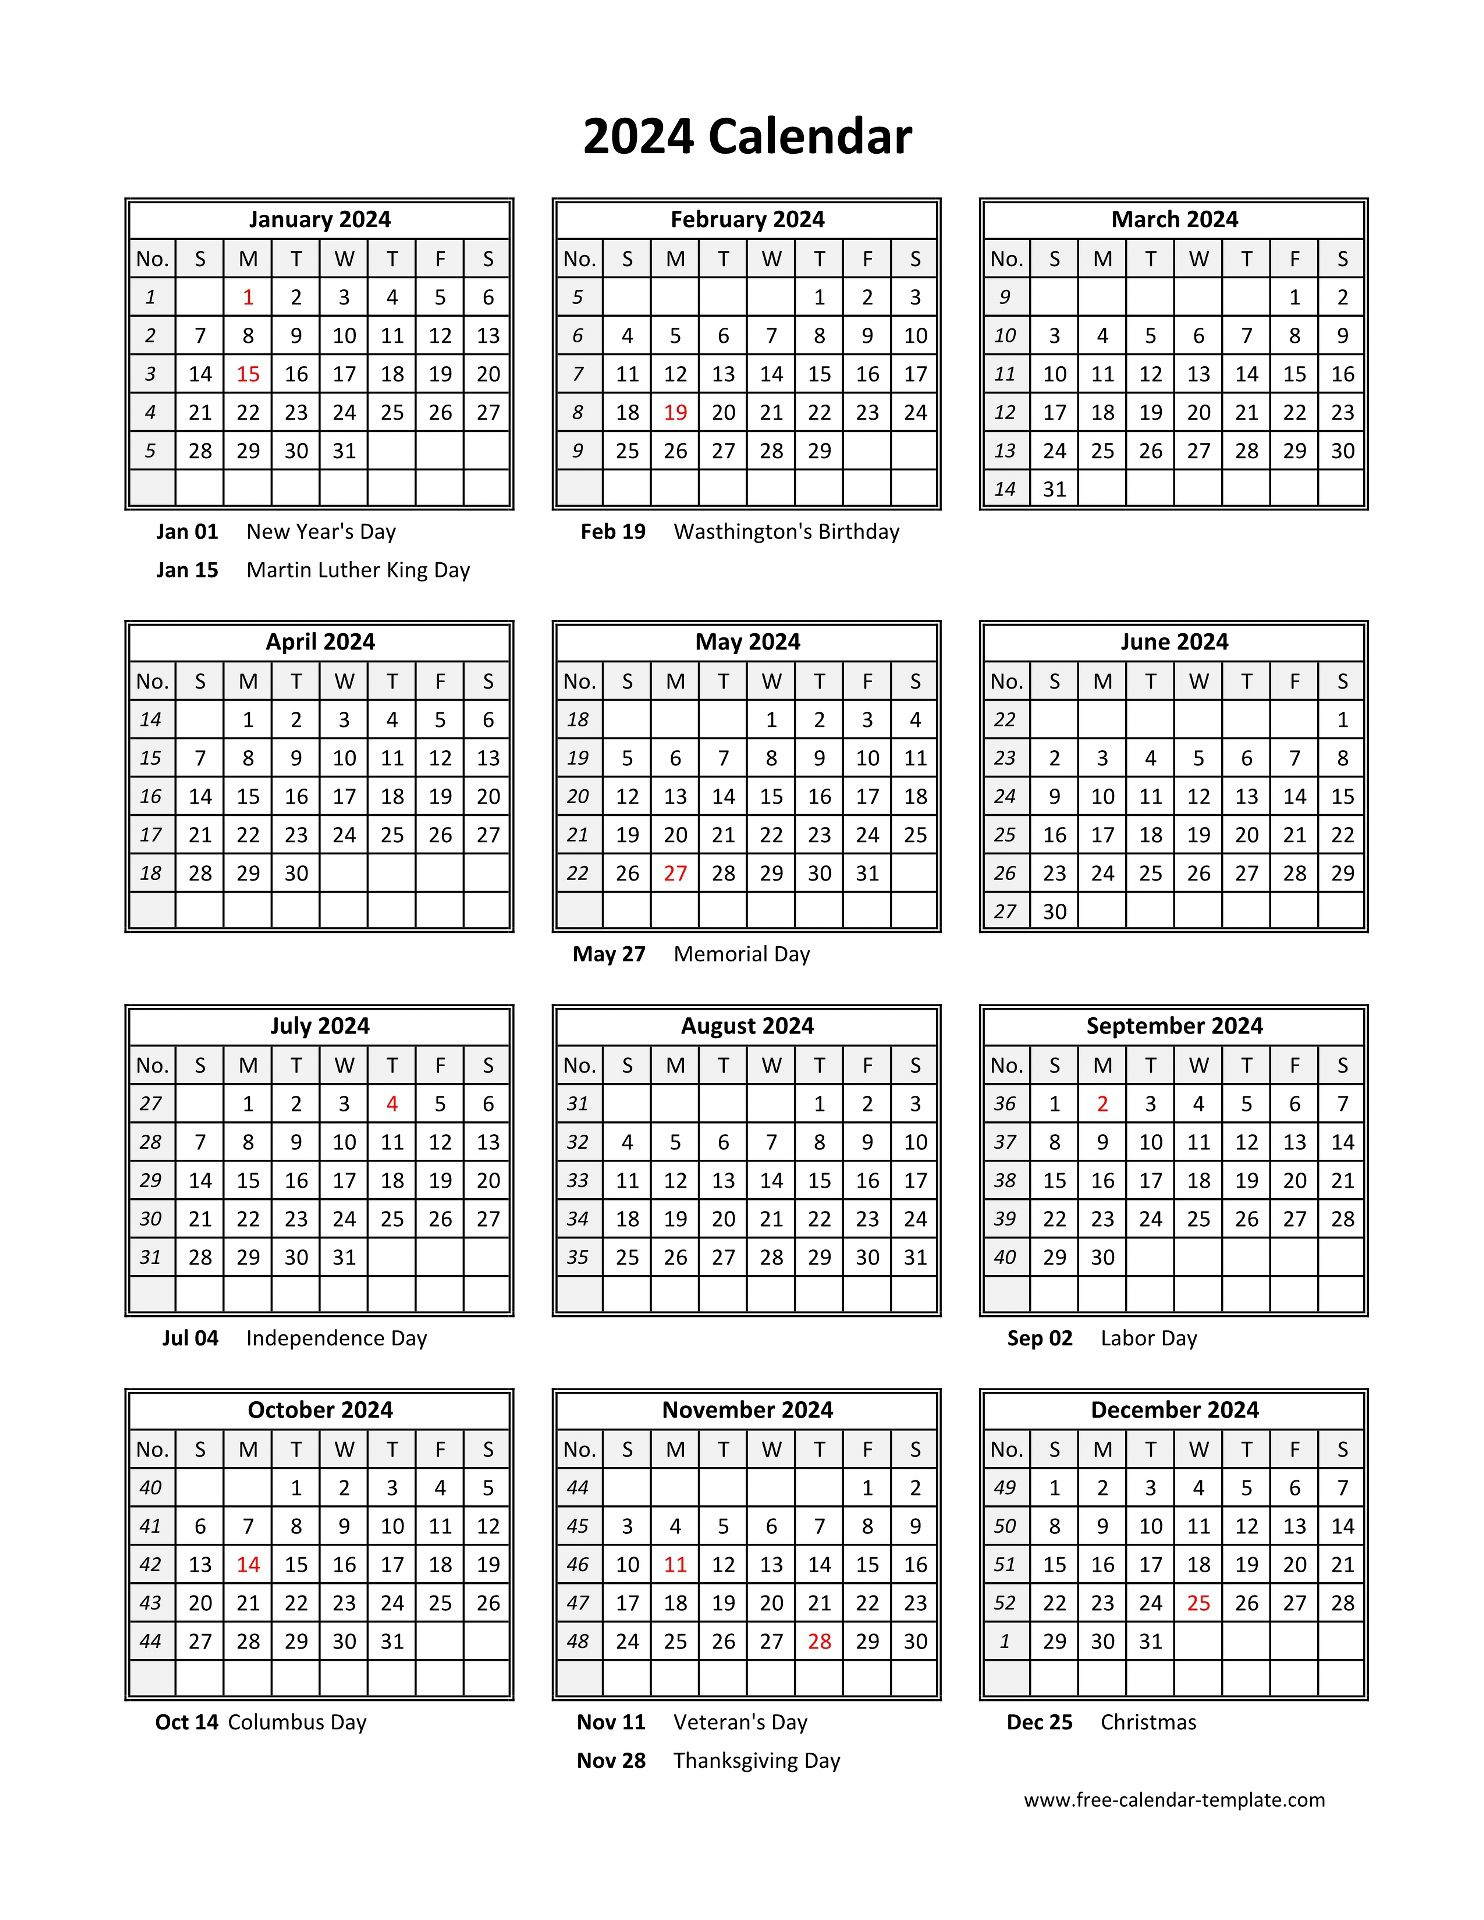 Yearly Printable Calendar 2024 With Holidays | Free-Calendar | 2024 Calendar Printable Free Pdf